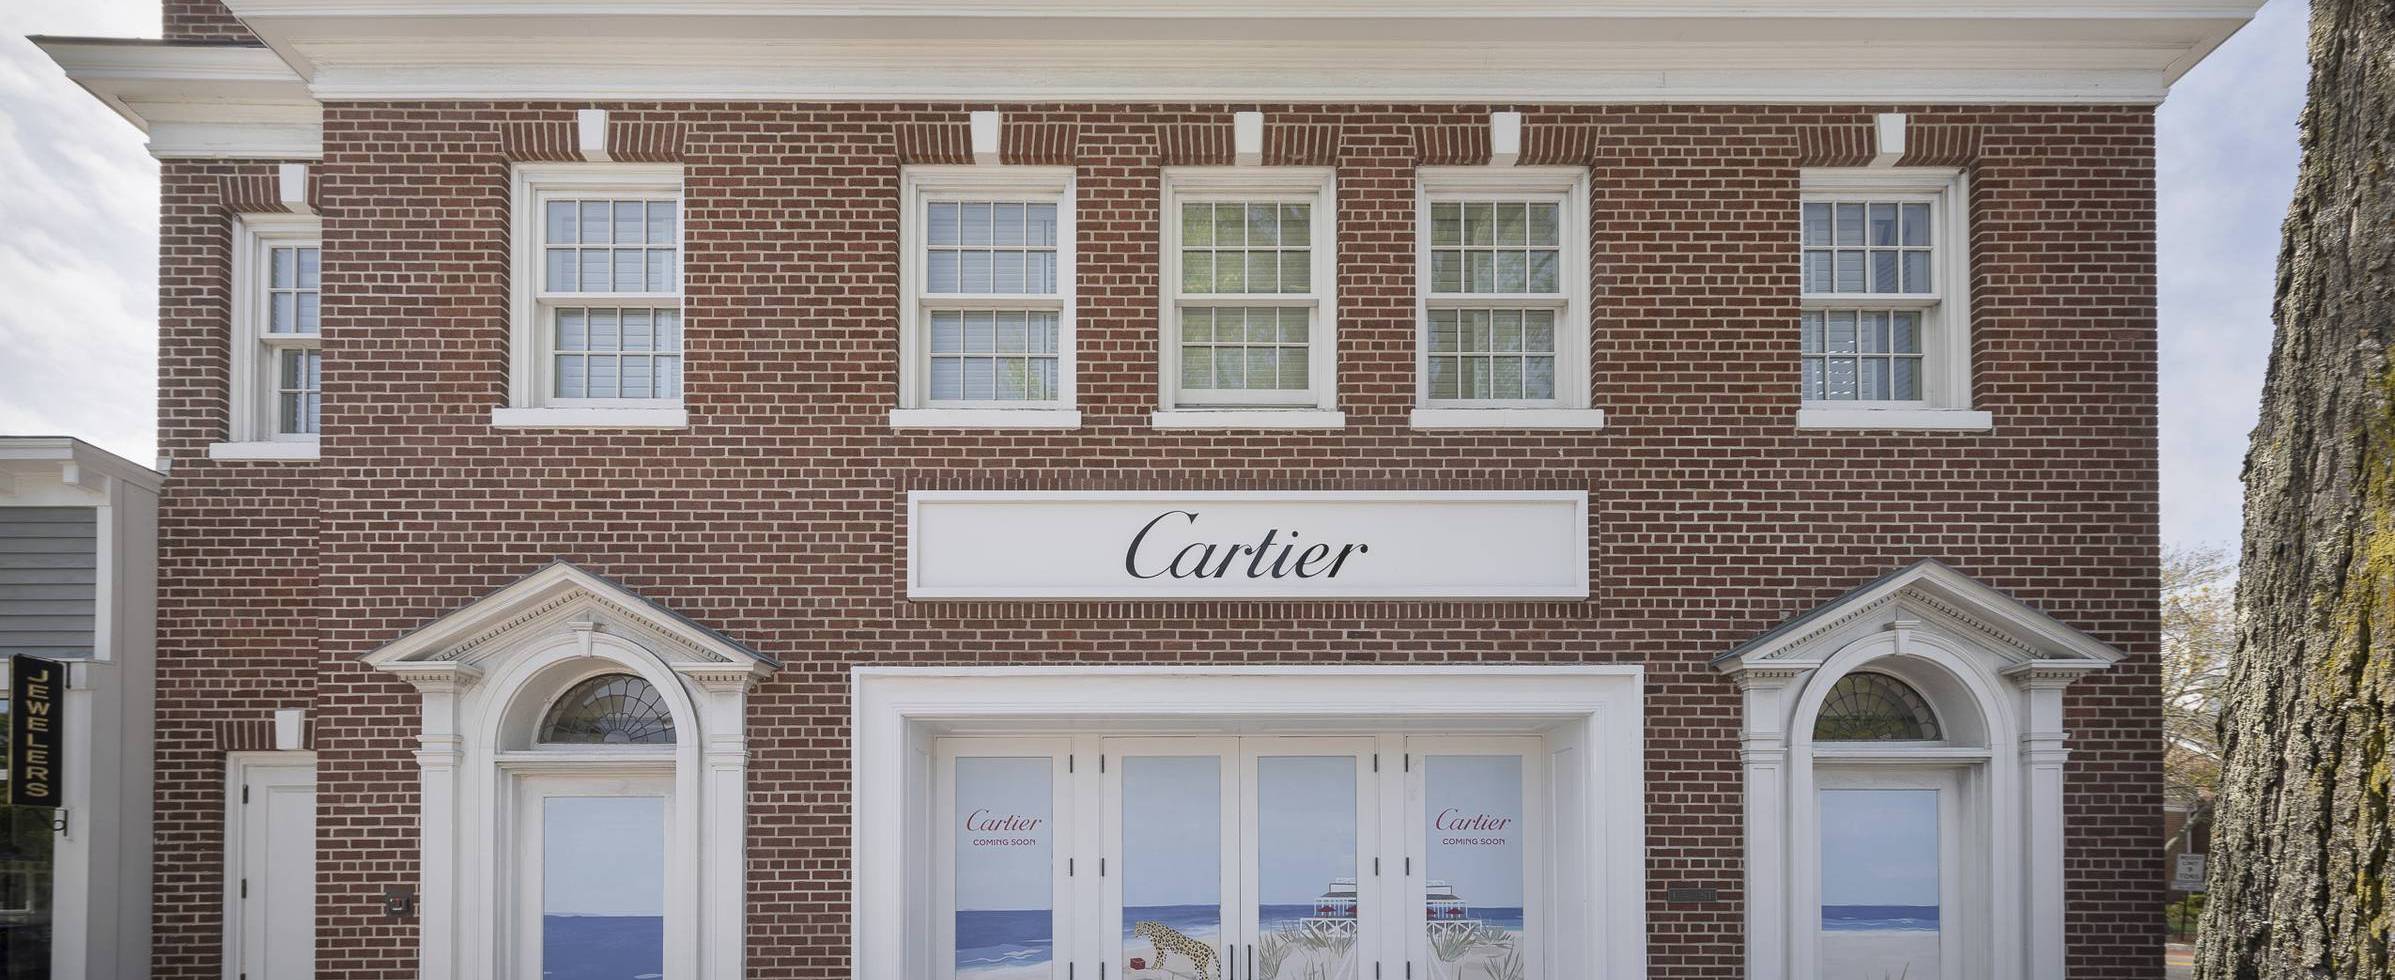 Cartier Pop-Up Arrives at The Royal - Palm Beach Illustrated